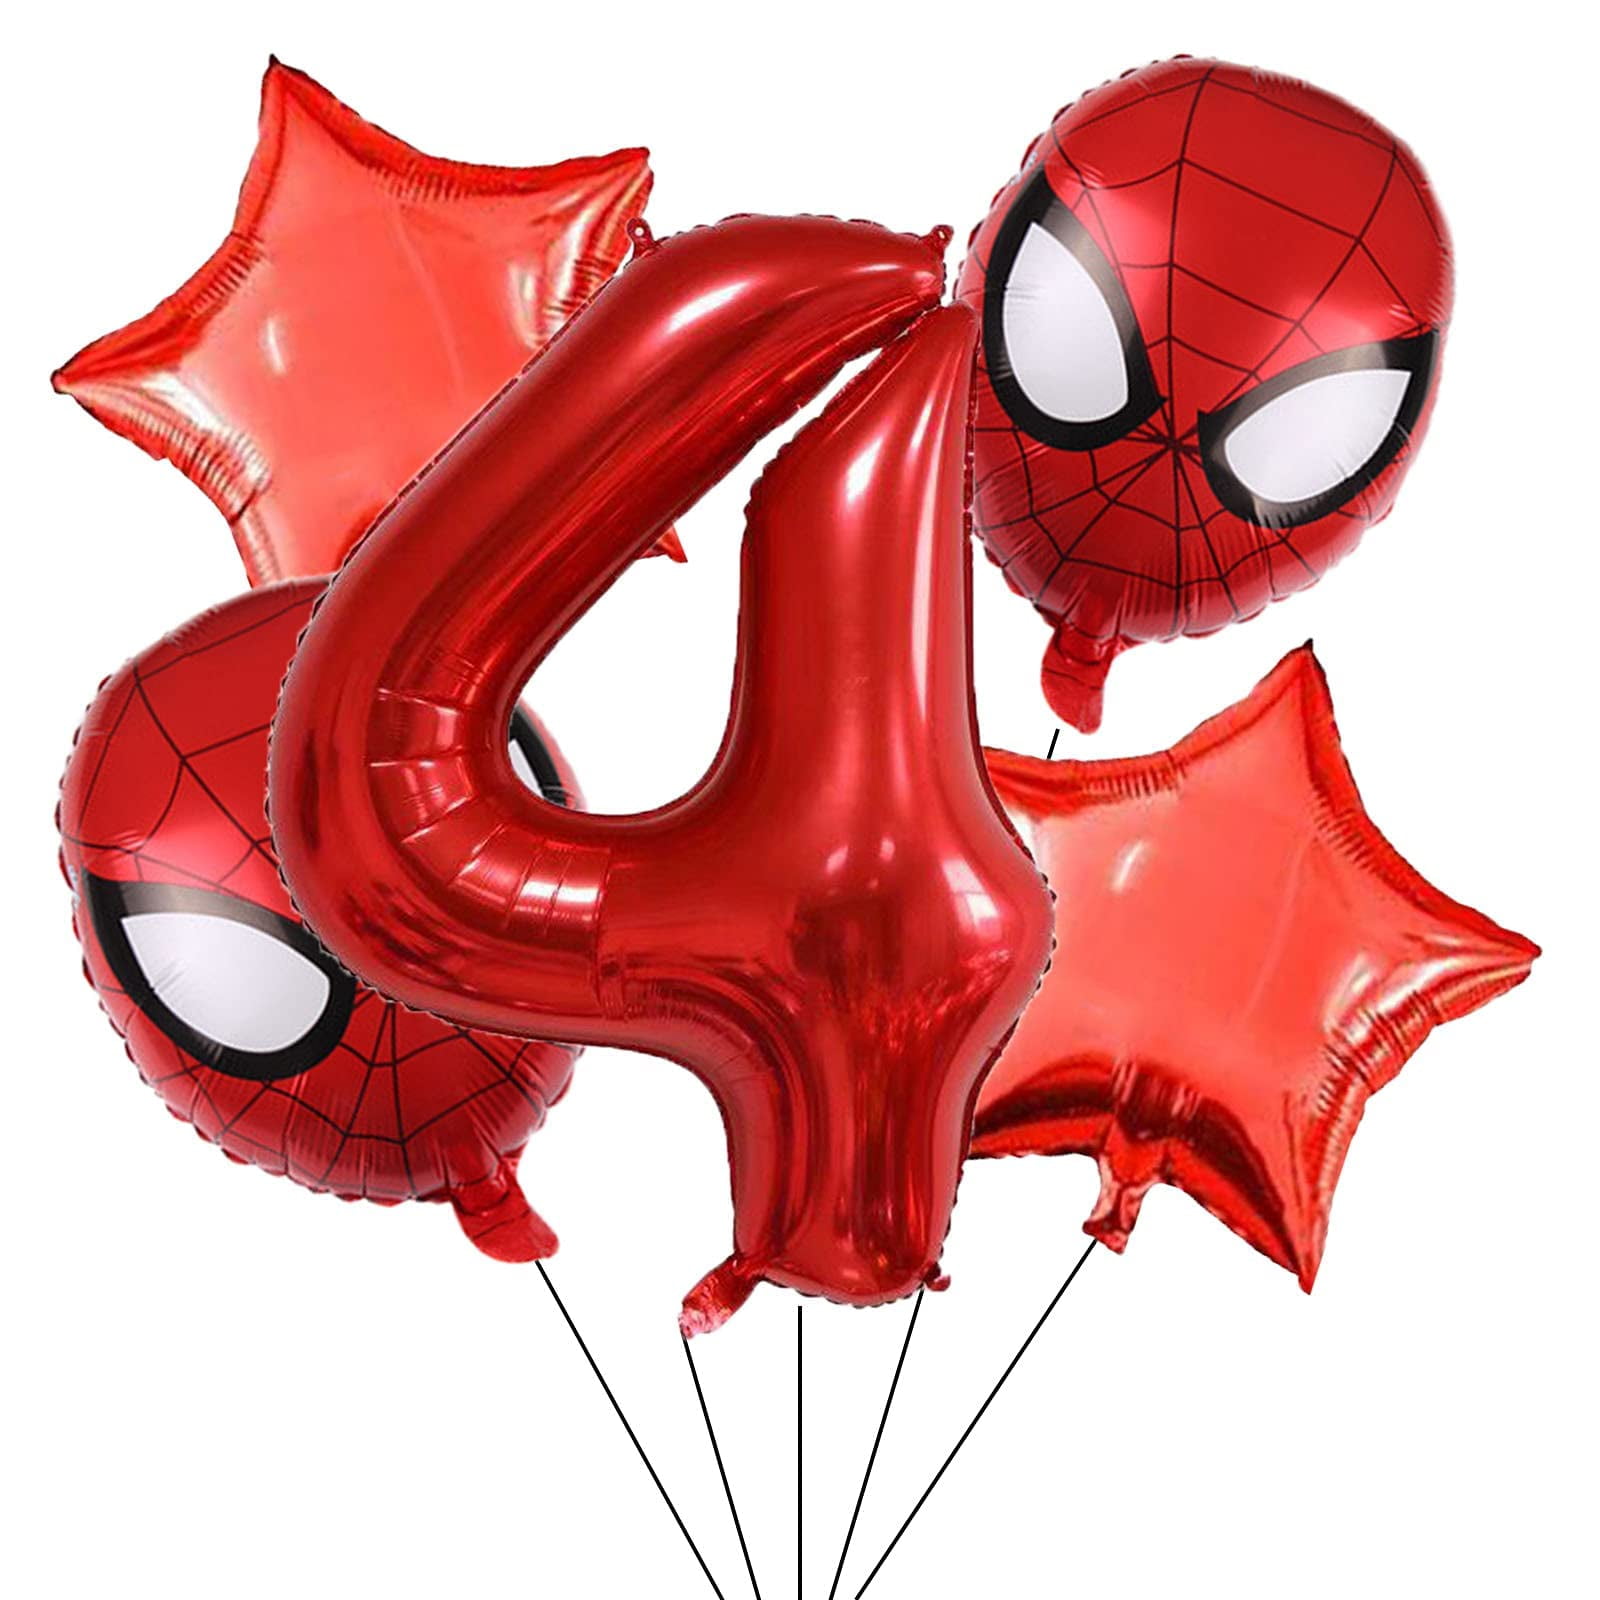 Superhero Spiderman 4th Birthday Decorations Red Number 4 Balloons ...